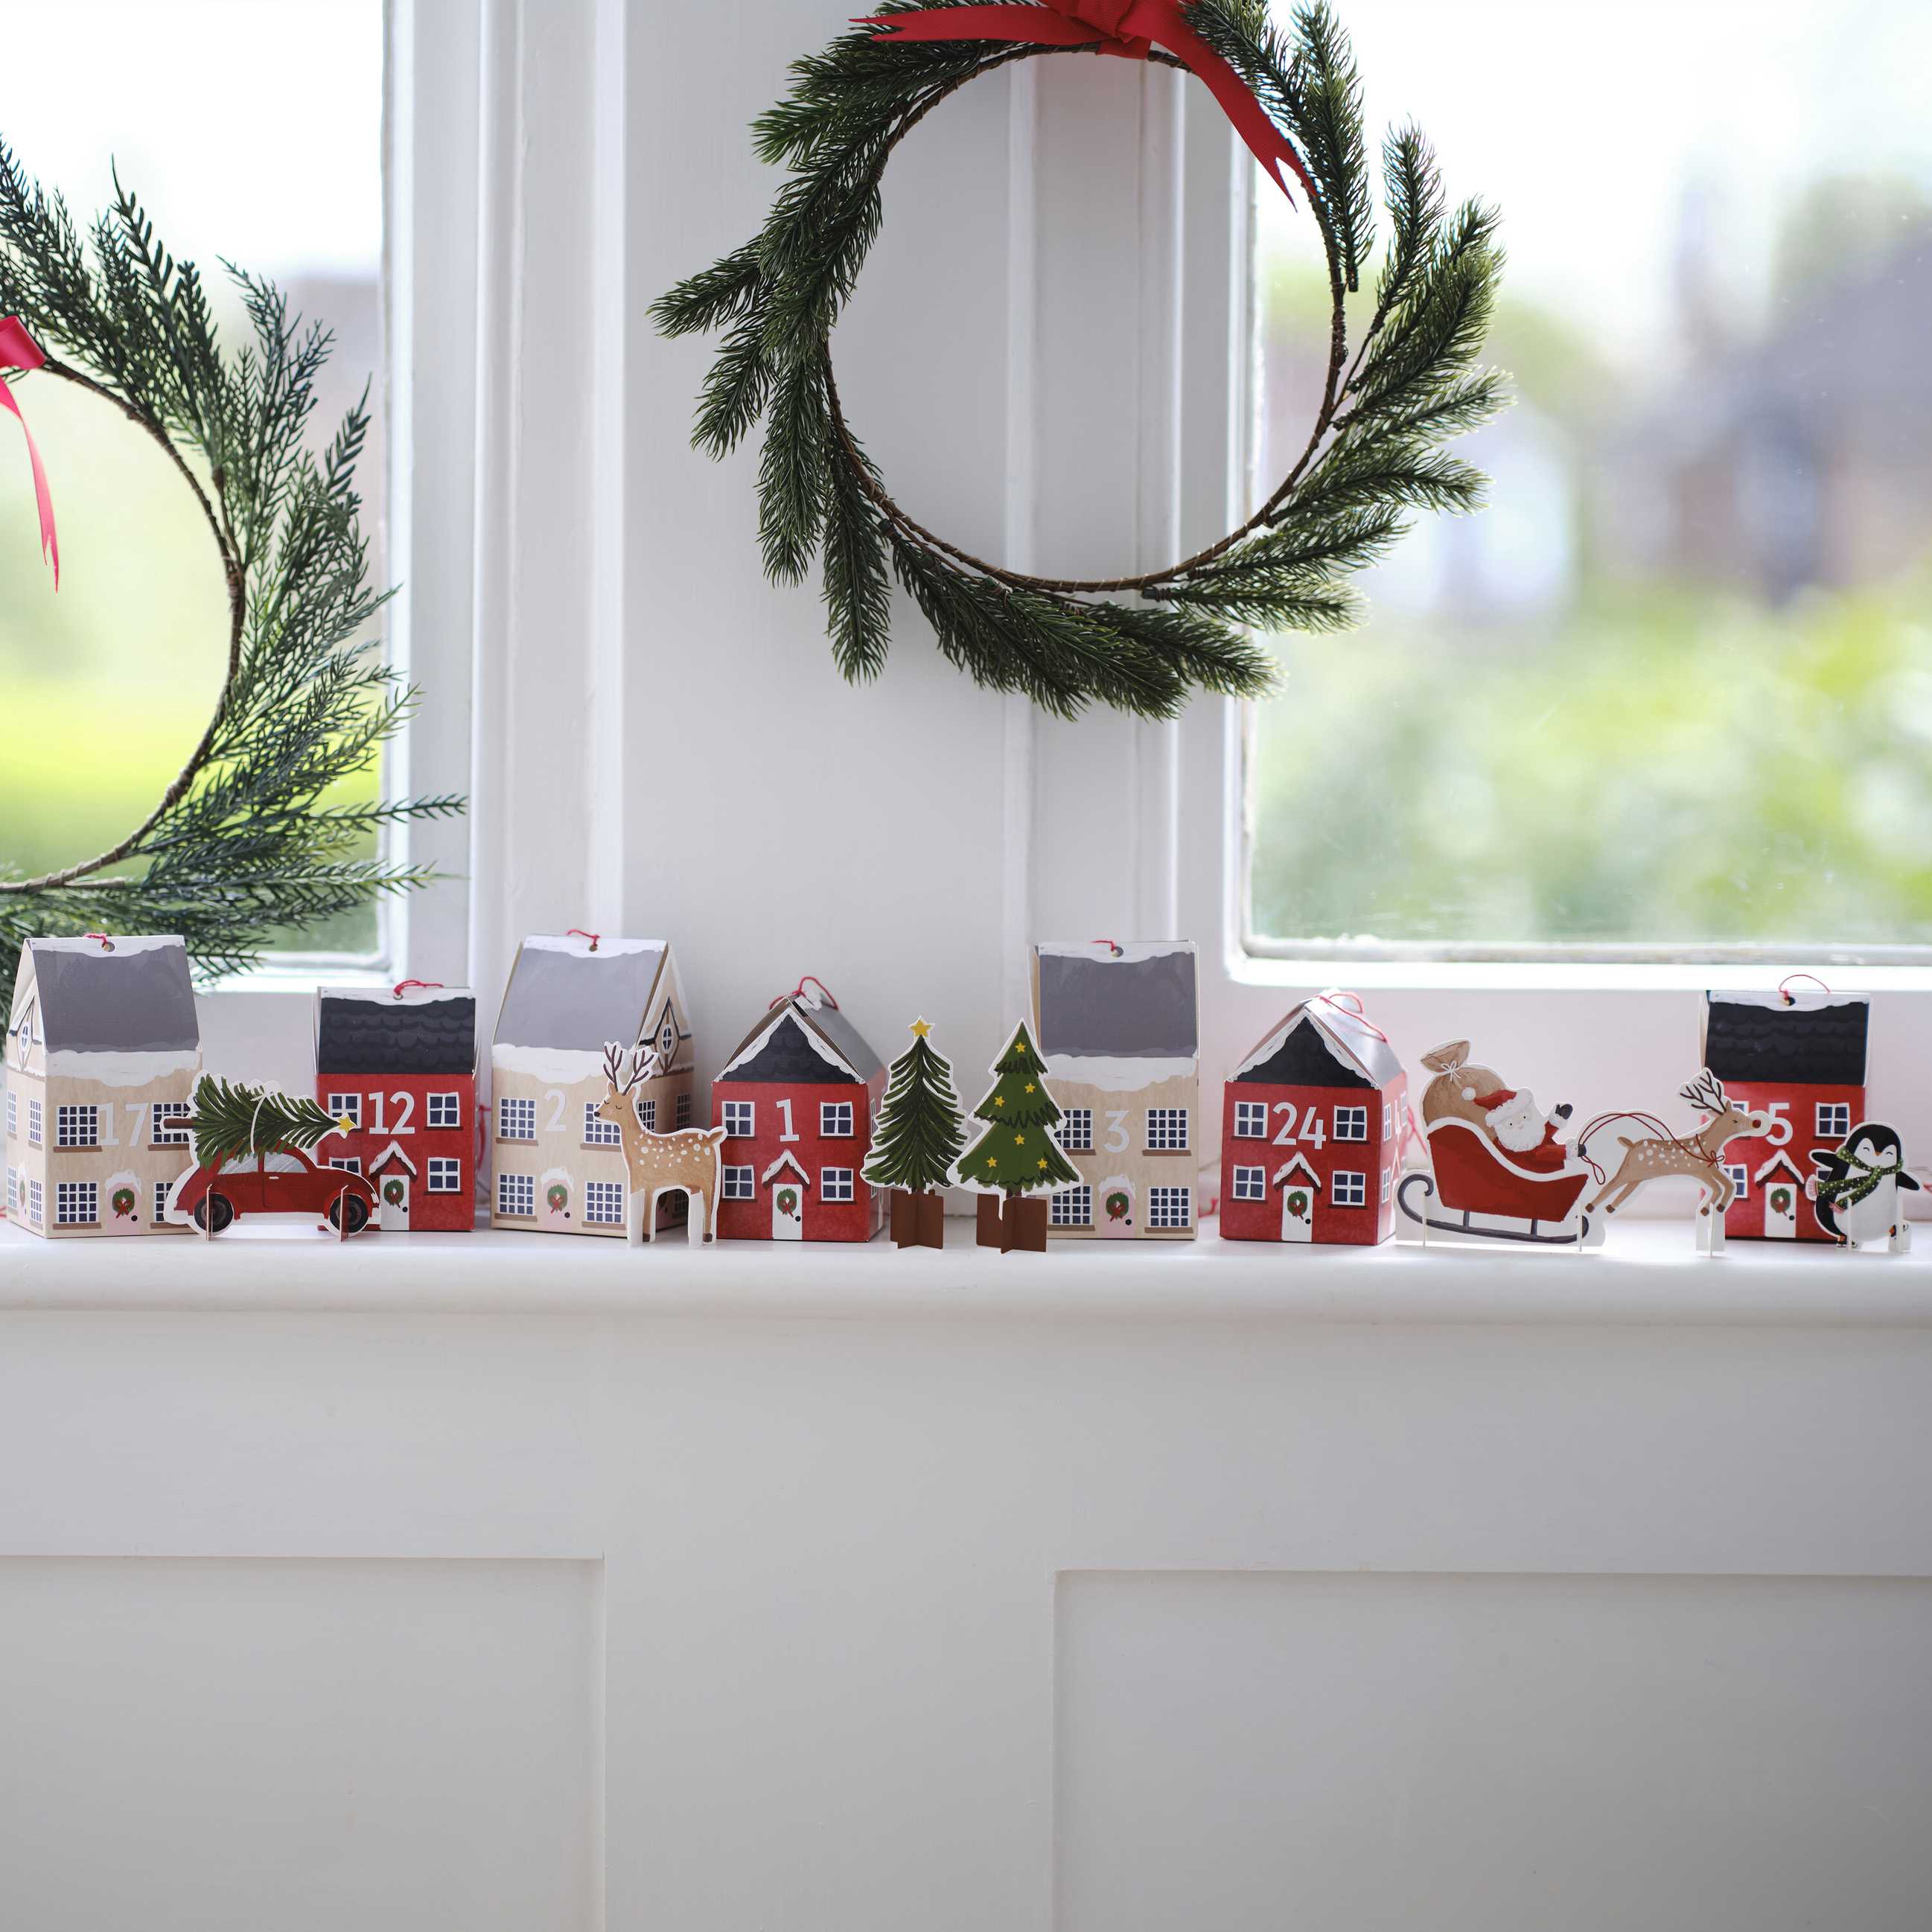 Make Your Own Christmas Advent Calendar Boxes